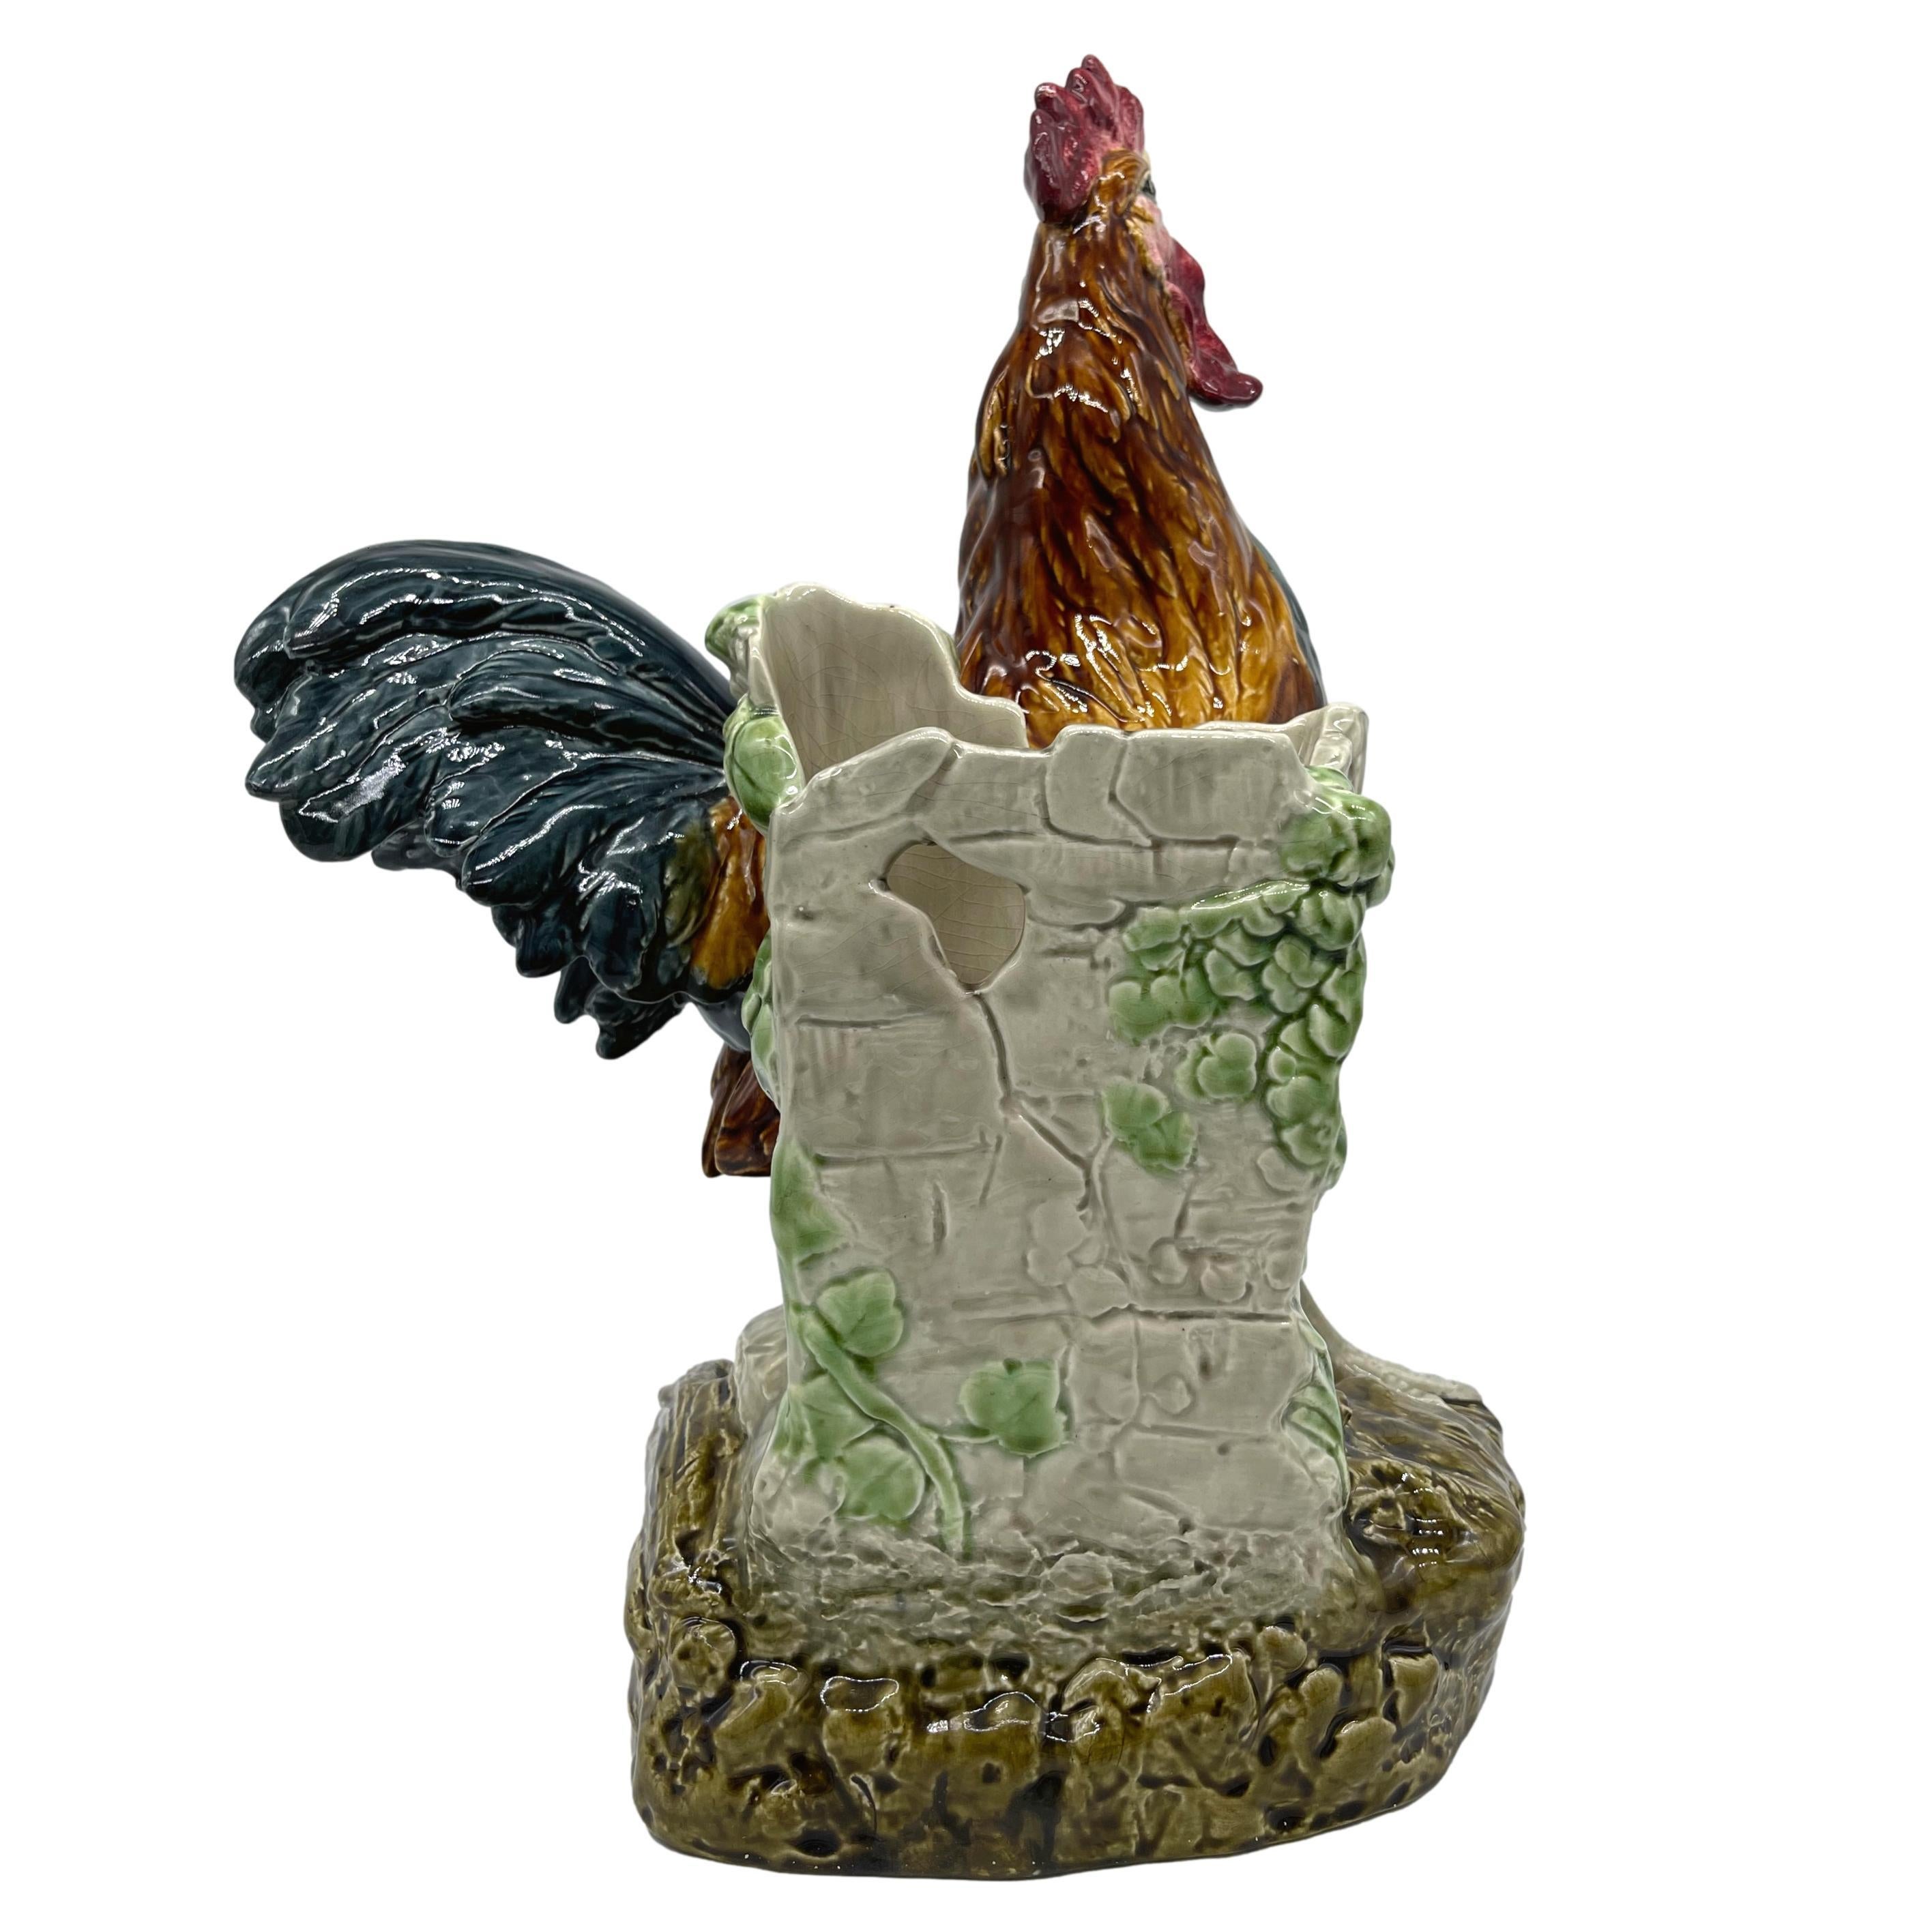 Majolica Rooster Large Spill Vase Signed Louis Carrier-Belleuse, French, ca 1890 In Good Condition For Sale In Banner Elk, NC